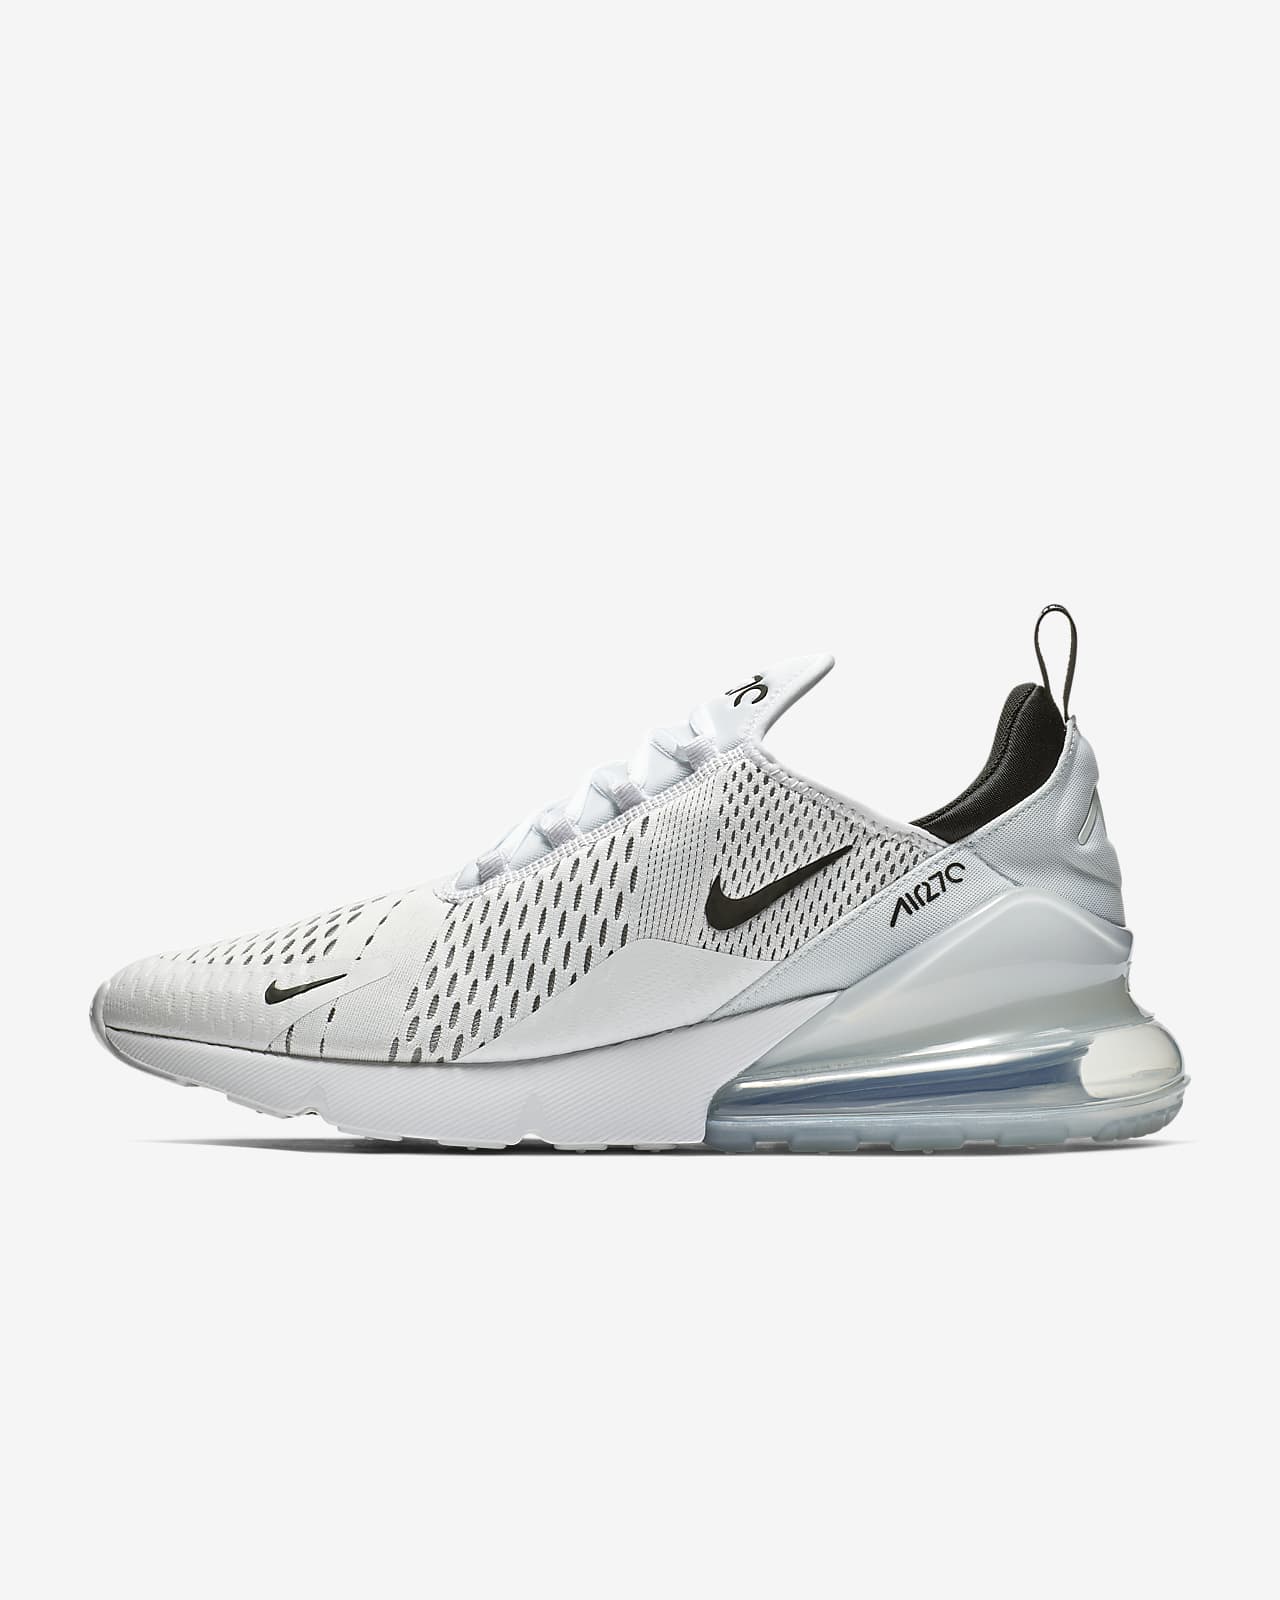 air max 270 shoes online -